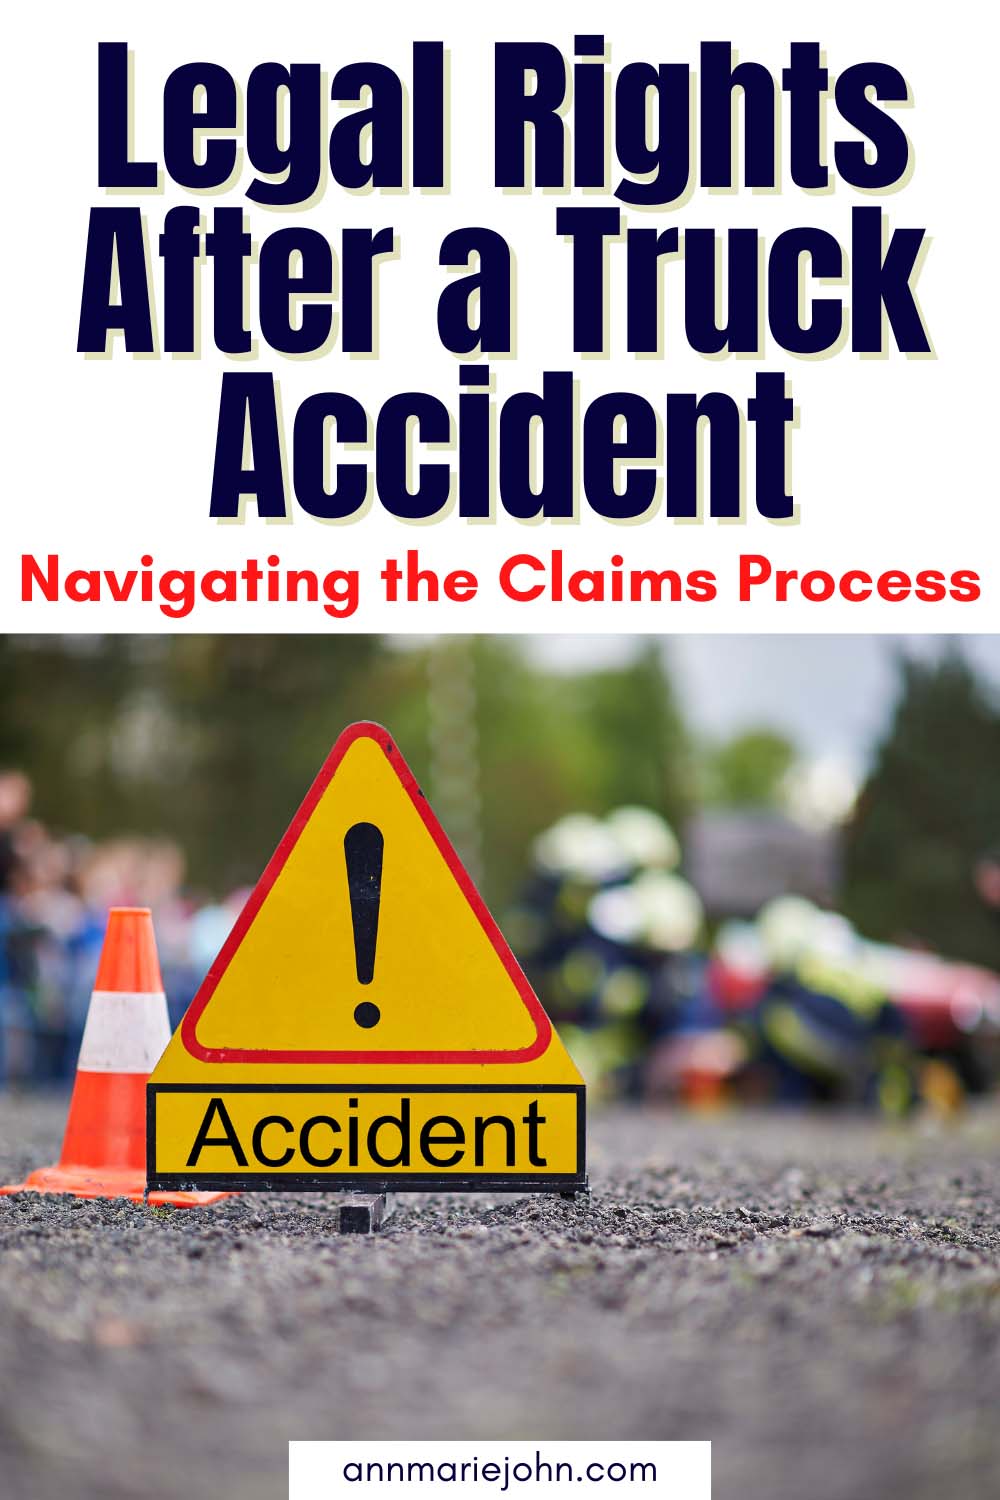 Legal Rights After a Truck Accident